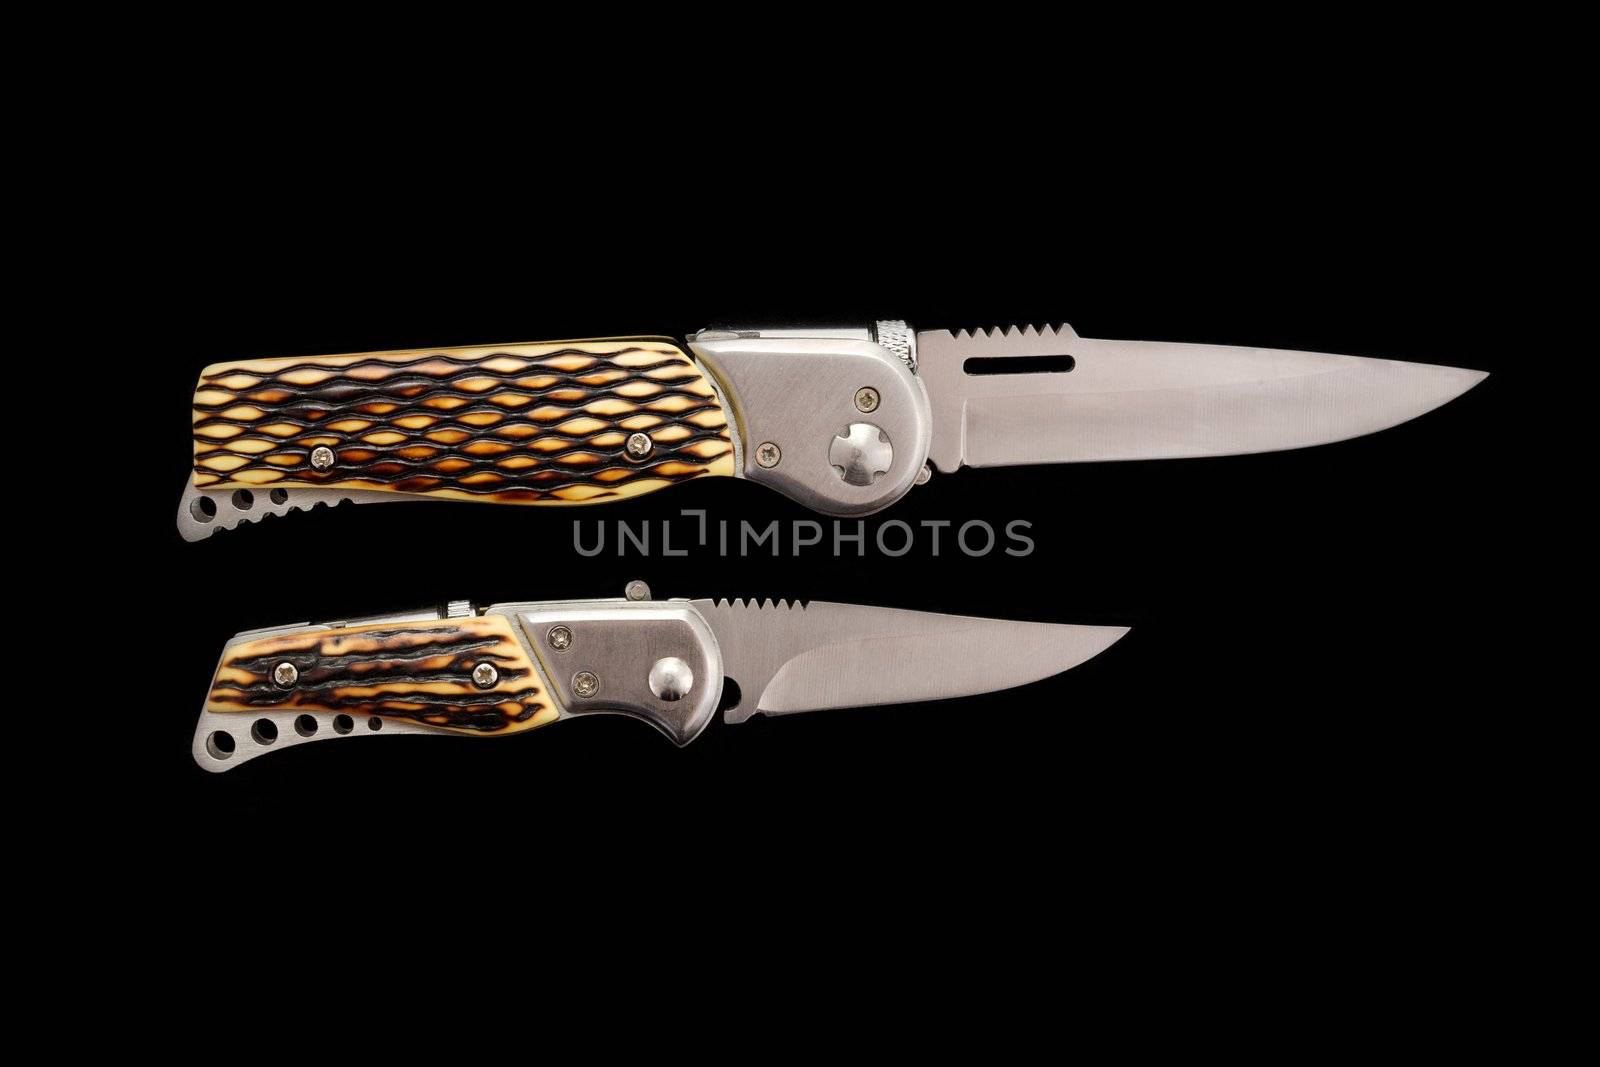 Two sharp knifes with beautiful handles on a dark background